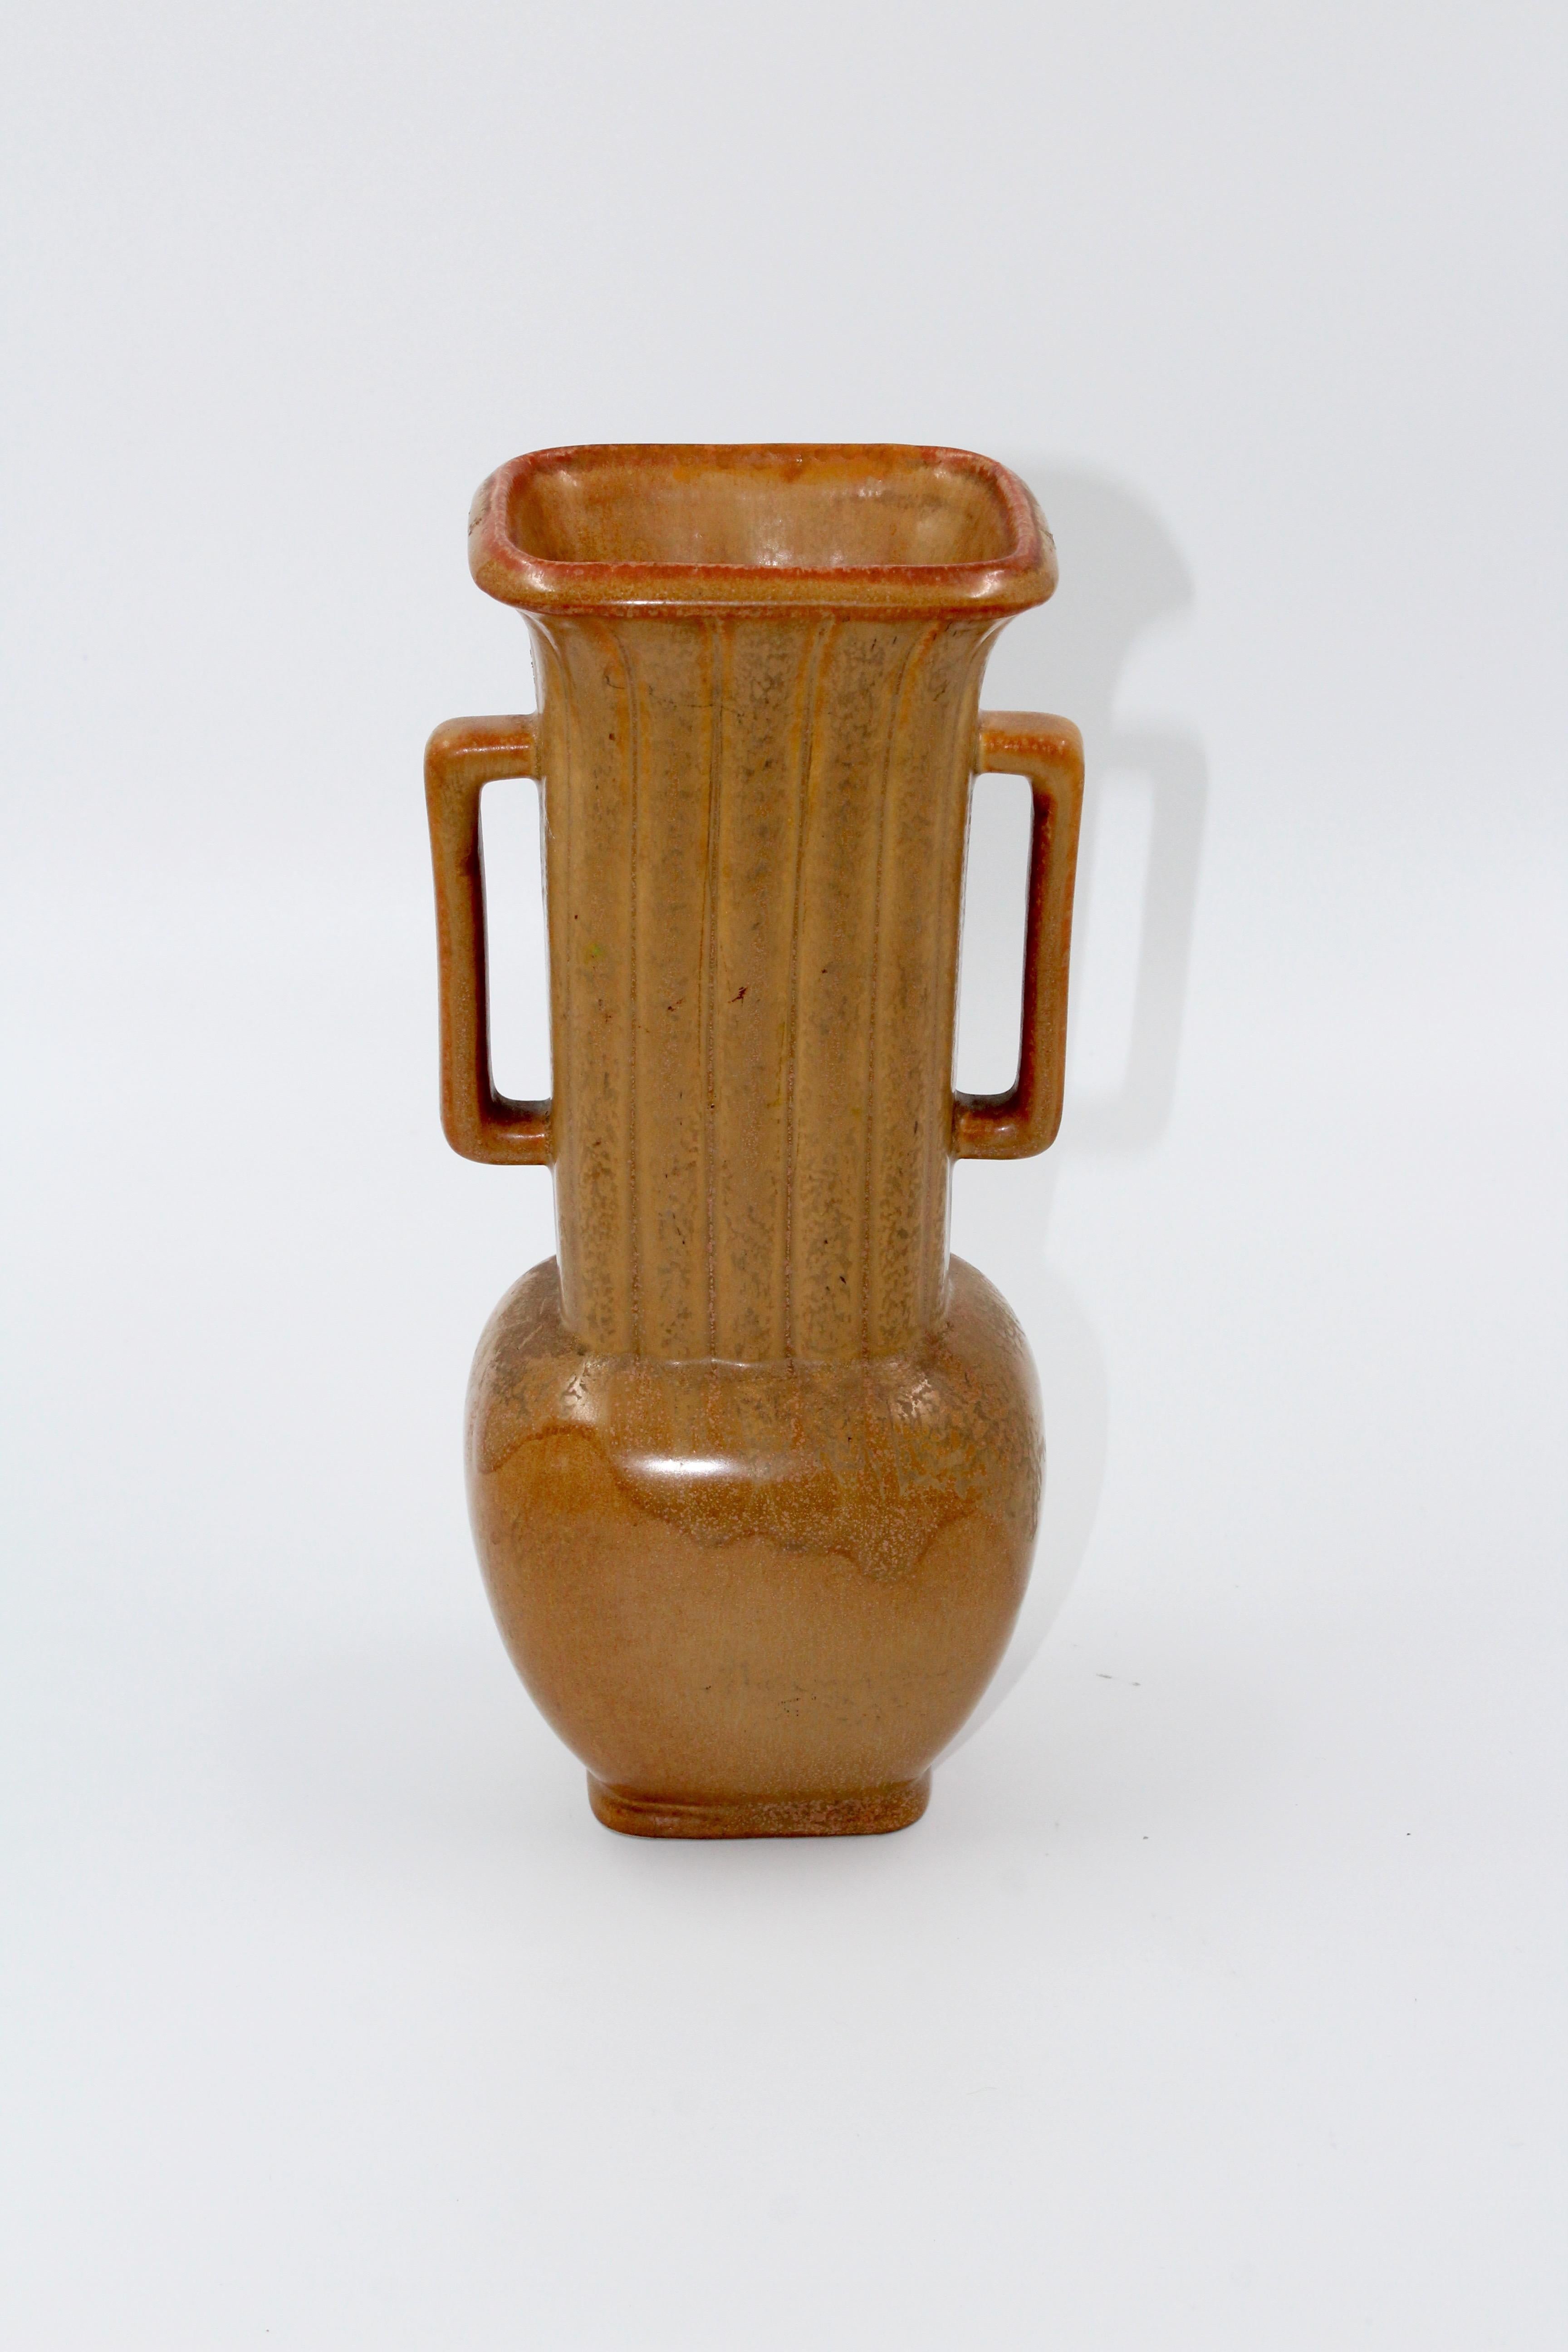 A large ceramic vase designed by Swedish Potter Gunnar Nylund in the 1950s and was manufactured by Rörstrand. The vase is in very good vintage condition.